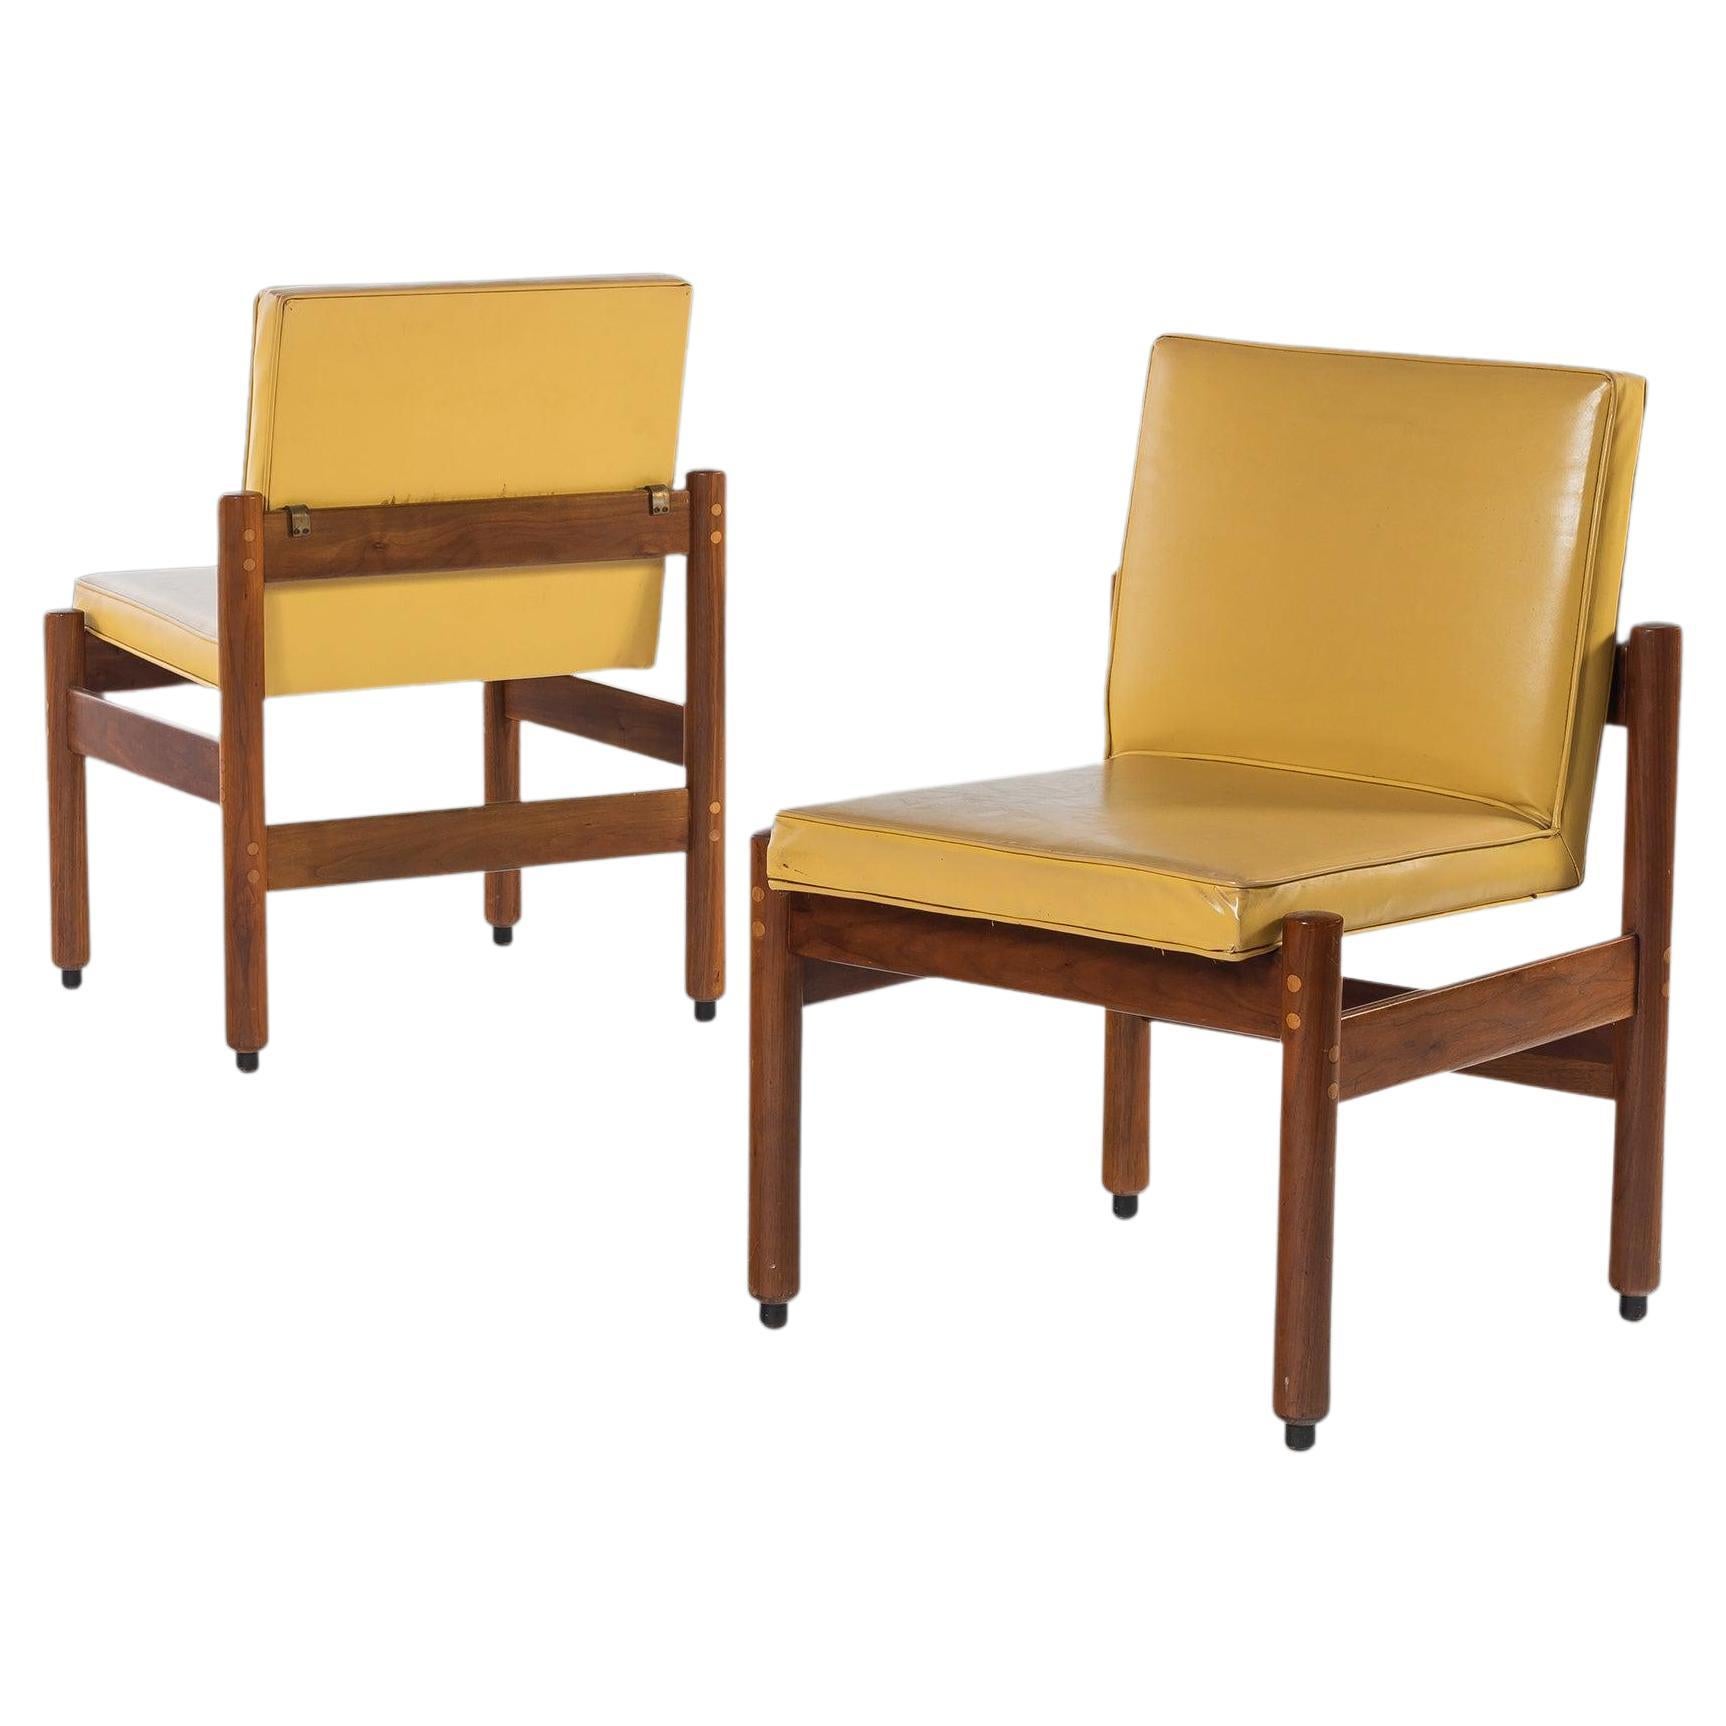 Set of Two '2' Minimalist Thonet Floating Walnut Armless Chairs, c. 1960s For Sale